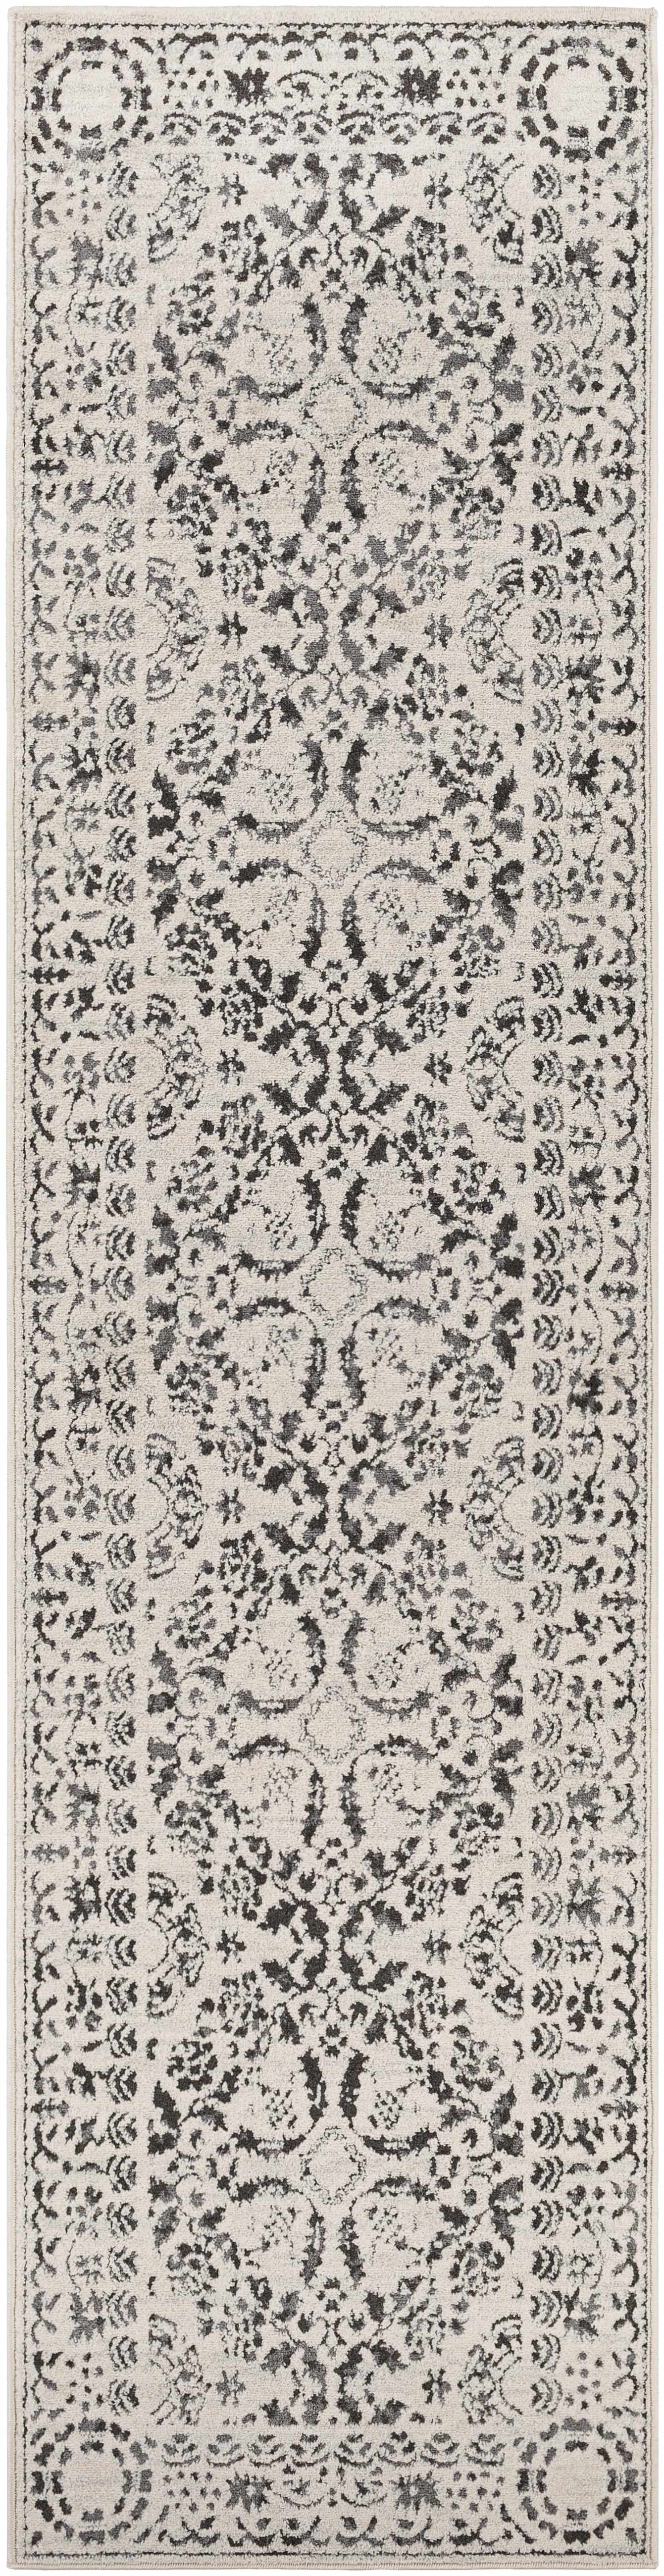 Sattley Modern Farmhouse Living Room Bedroom Dining Room Area Rug -  Transitional Bohemian Carpet - Non Shed, Stain Resistant - Beige, Grey,  Black